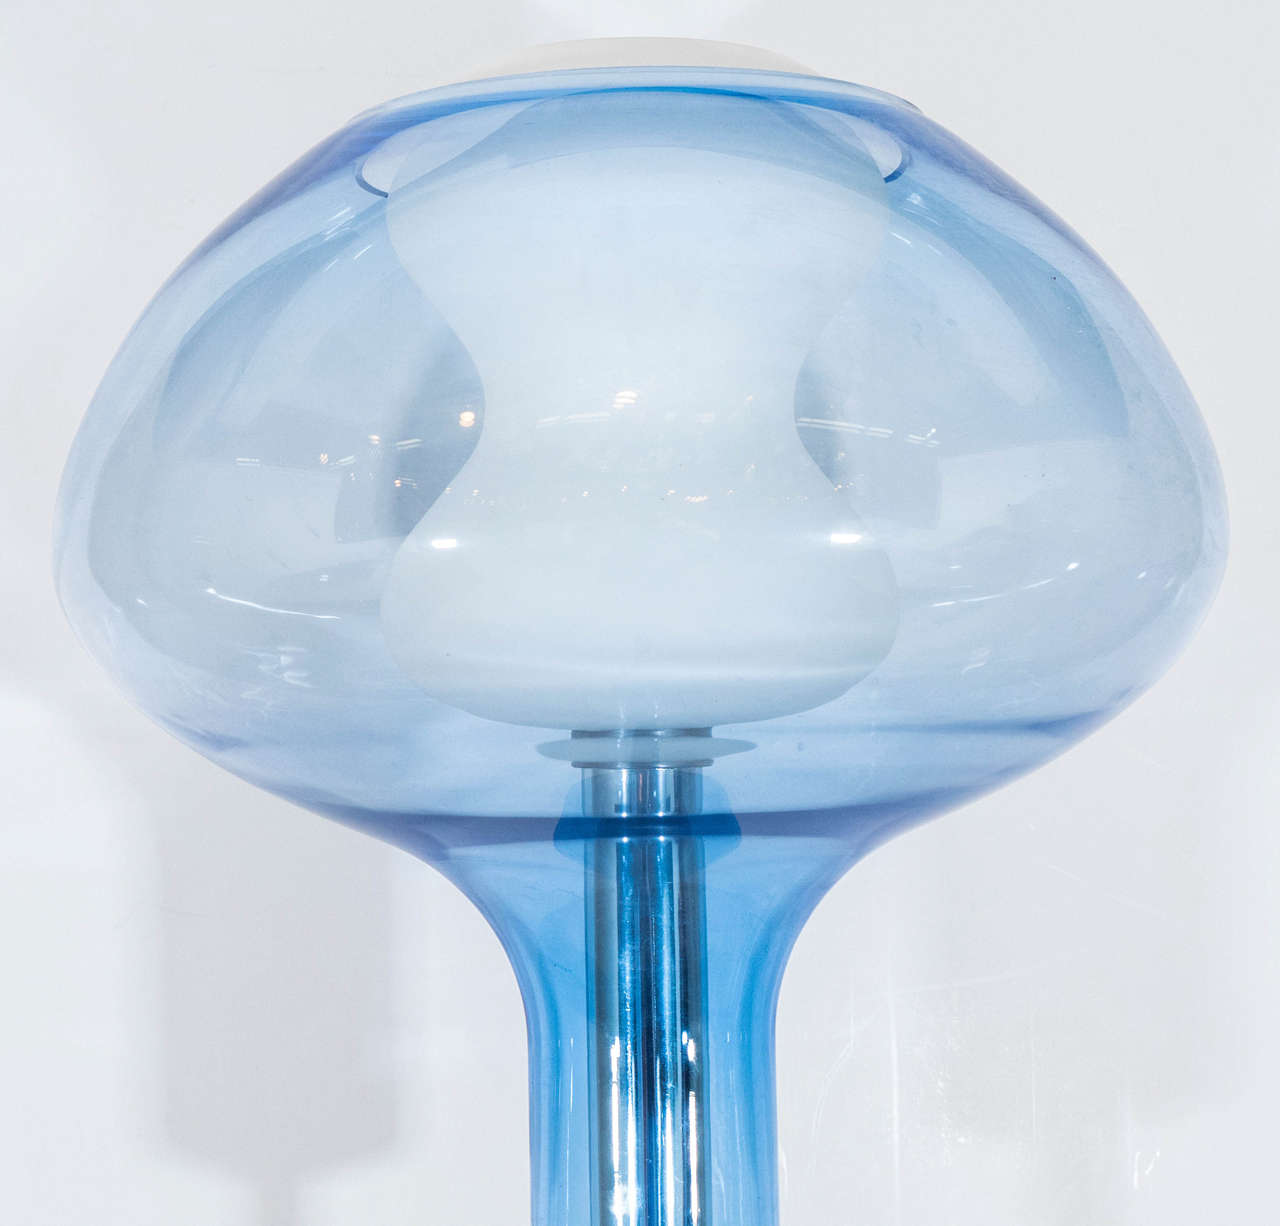 A Midcentury Floor Lamp with Dual Murano Glass Shade in Blue and White Lattimo 1